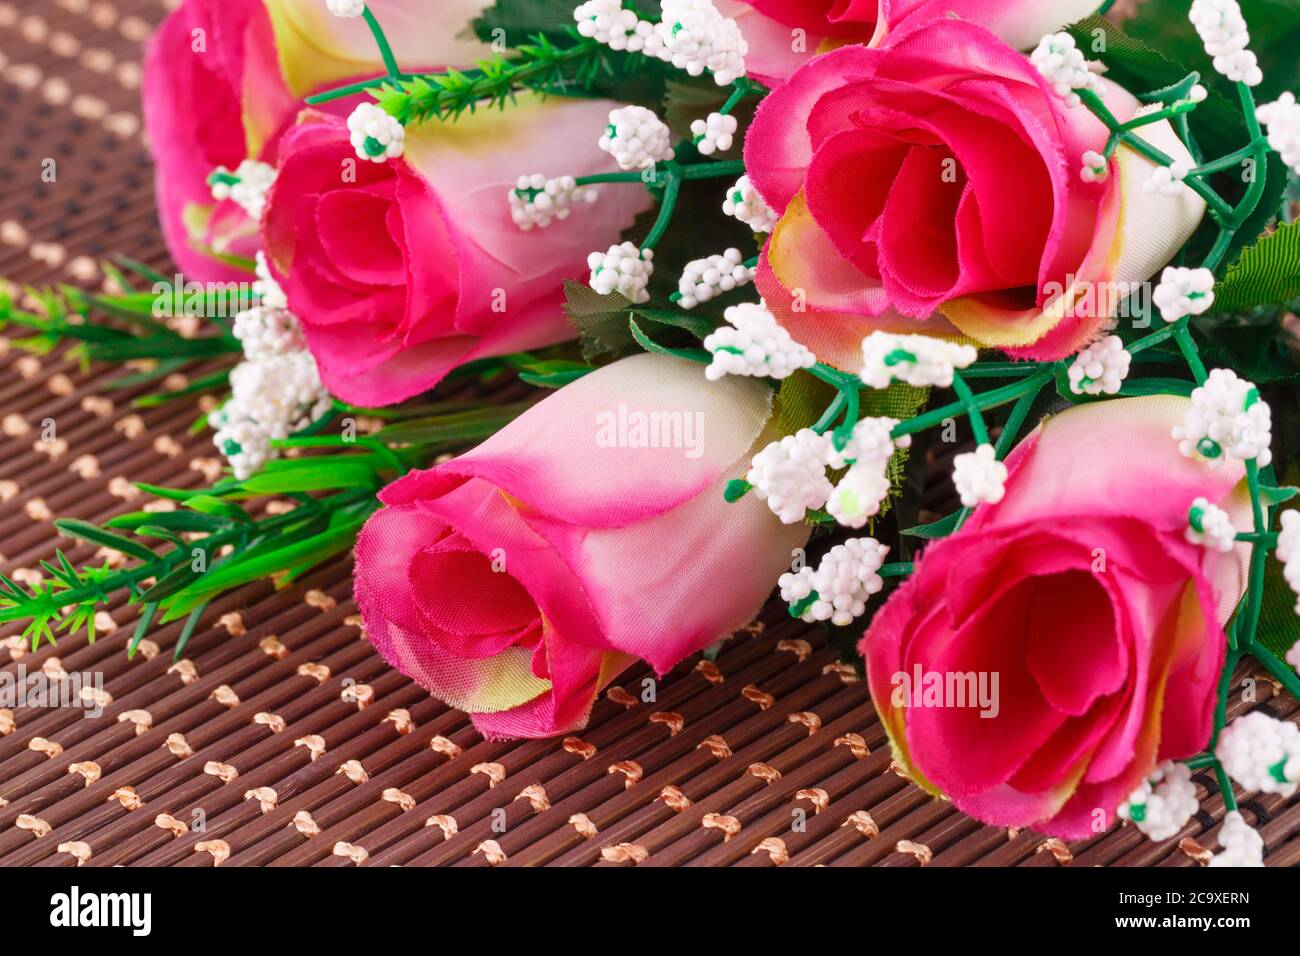 Pink fabric roses on bamboo background, closeup picture. Stock Photo